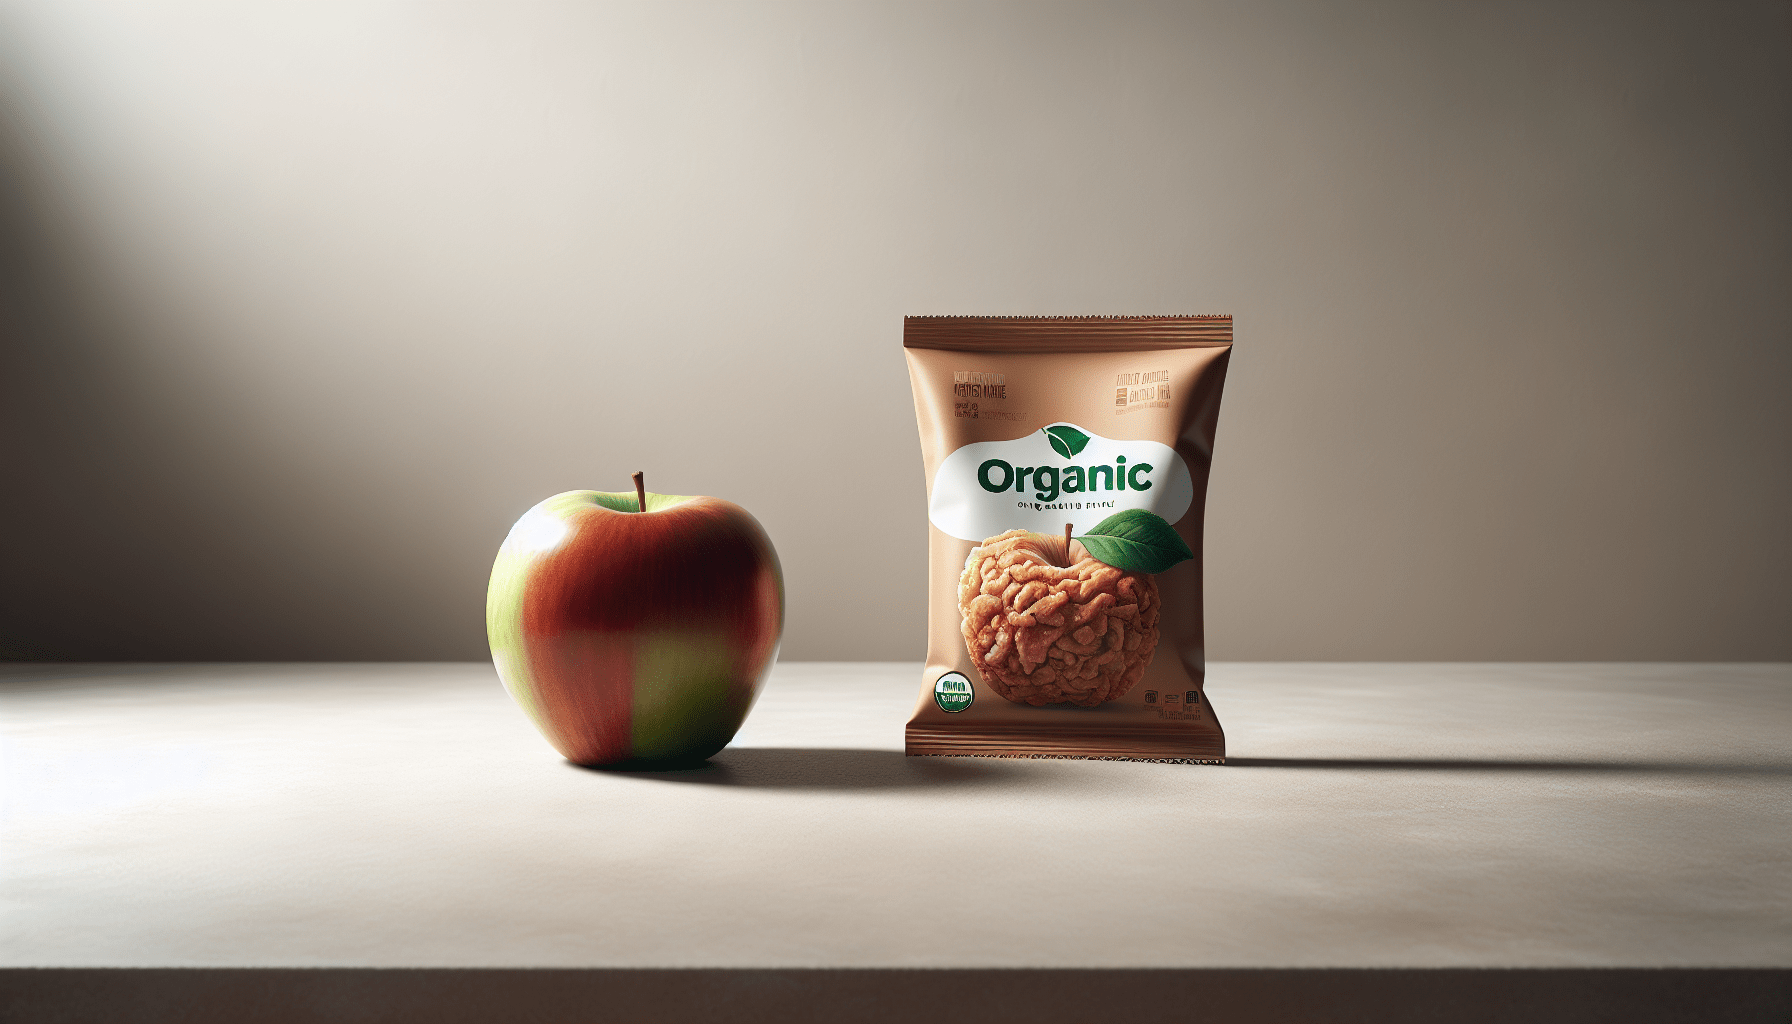 Are Organic Processed Foods Truly Healthier?